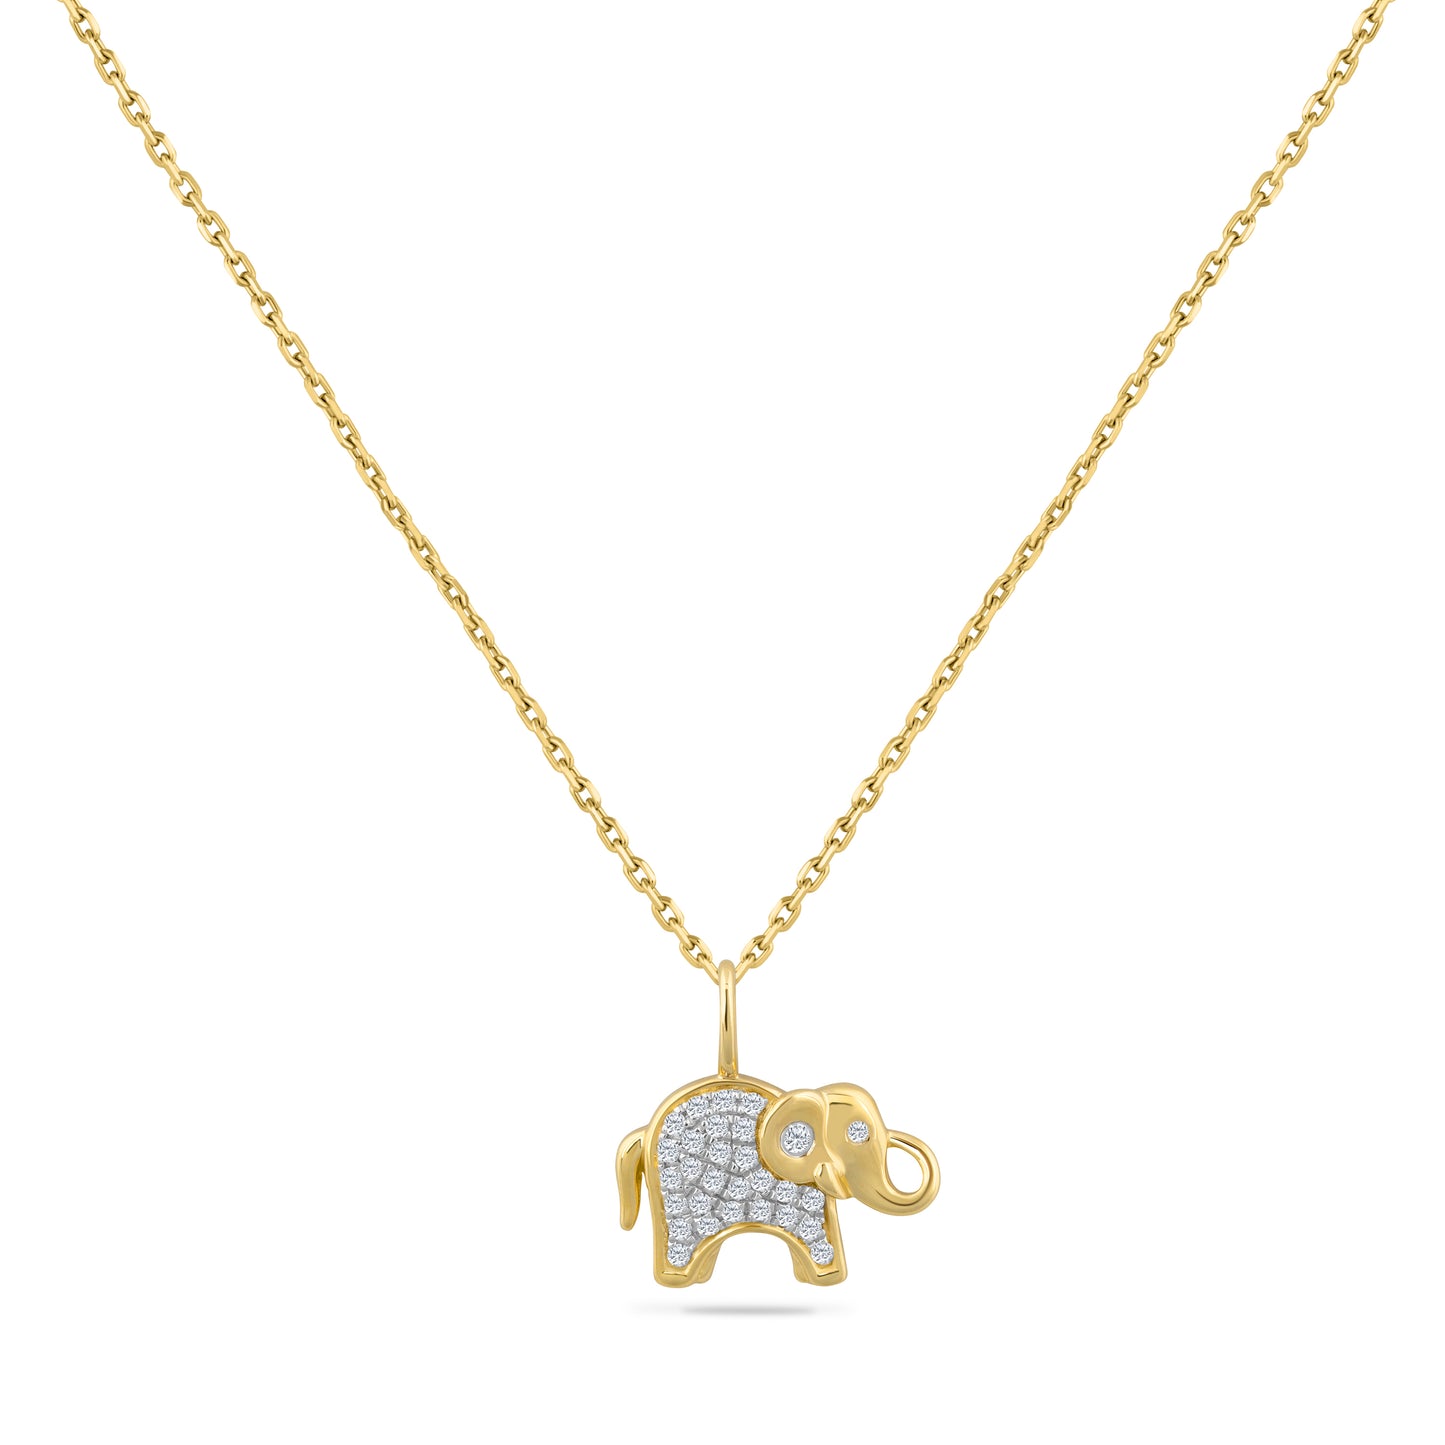 ADORABLE 14K BABY ELEPHANT PENDANT ON 18 INCHES CHAIN